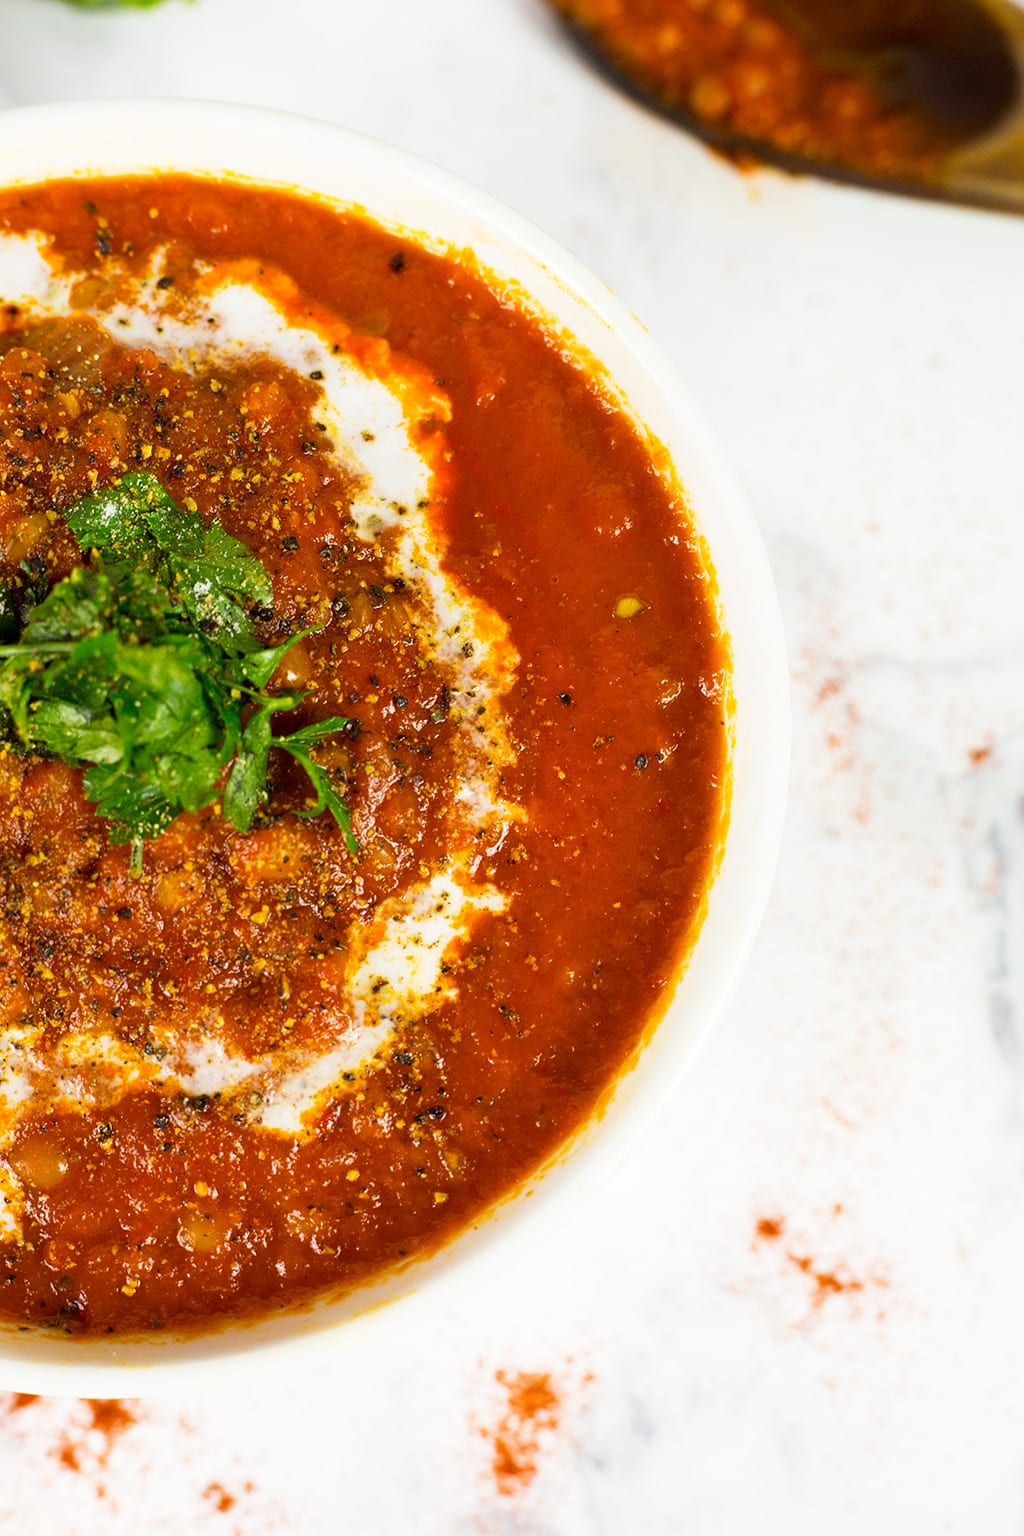 Roasted Red Pepper, Tomato & Lentil Soup with a swirl of coconut cream and parsley on top. Bowl on a white background with a wooden sppon behind it.